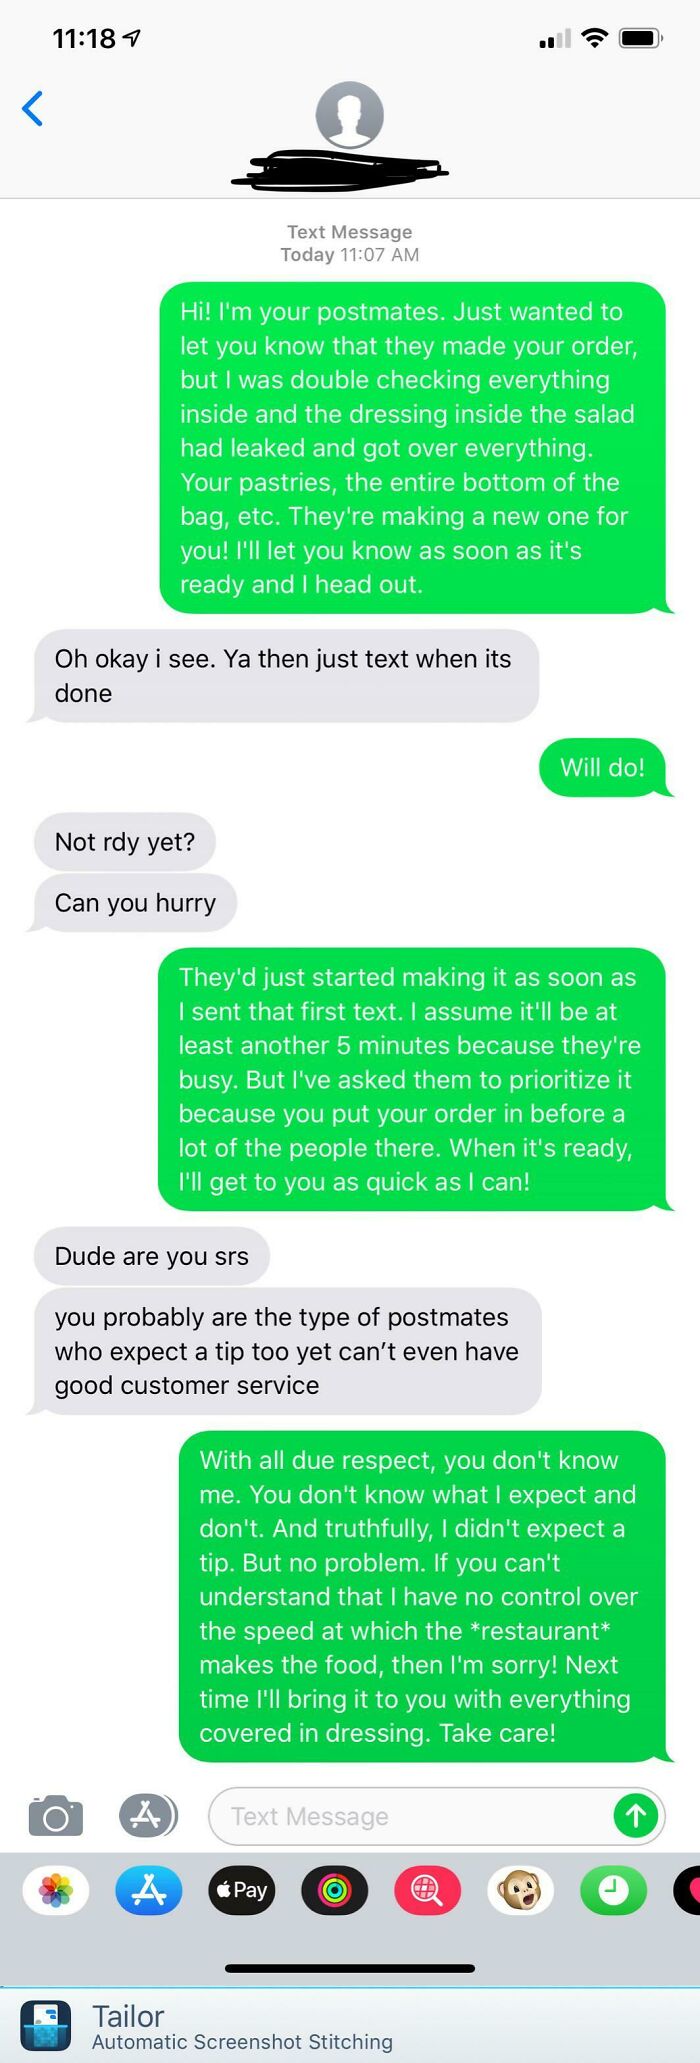 So Done With People. Btw, The “Not Rdy Yet” Happened 5 Min After My First Text